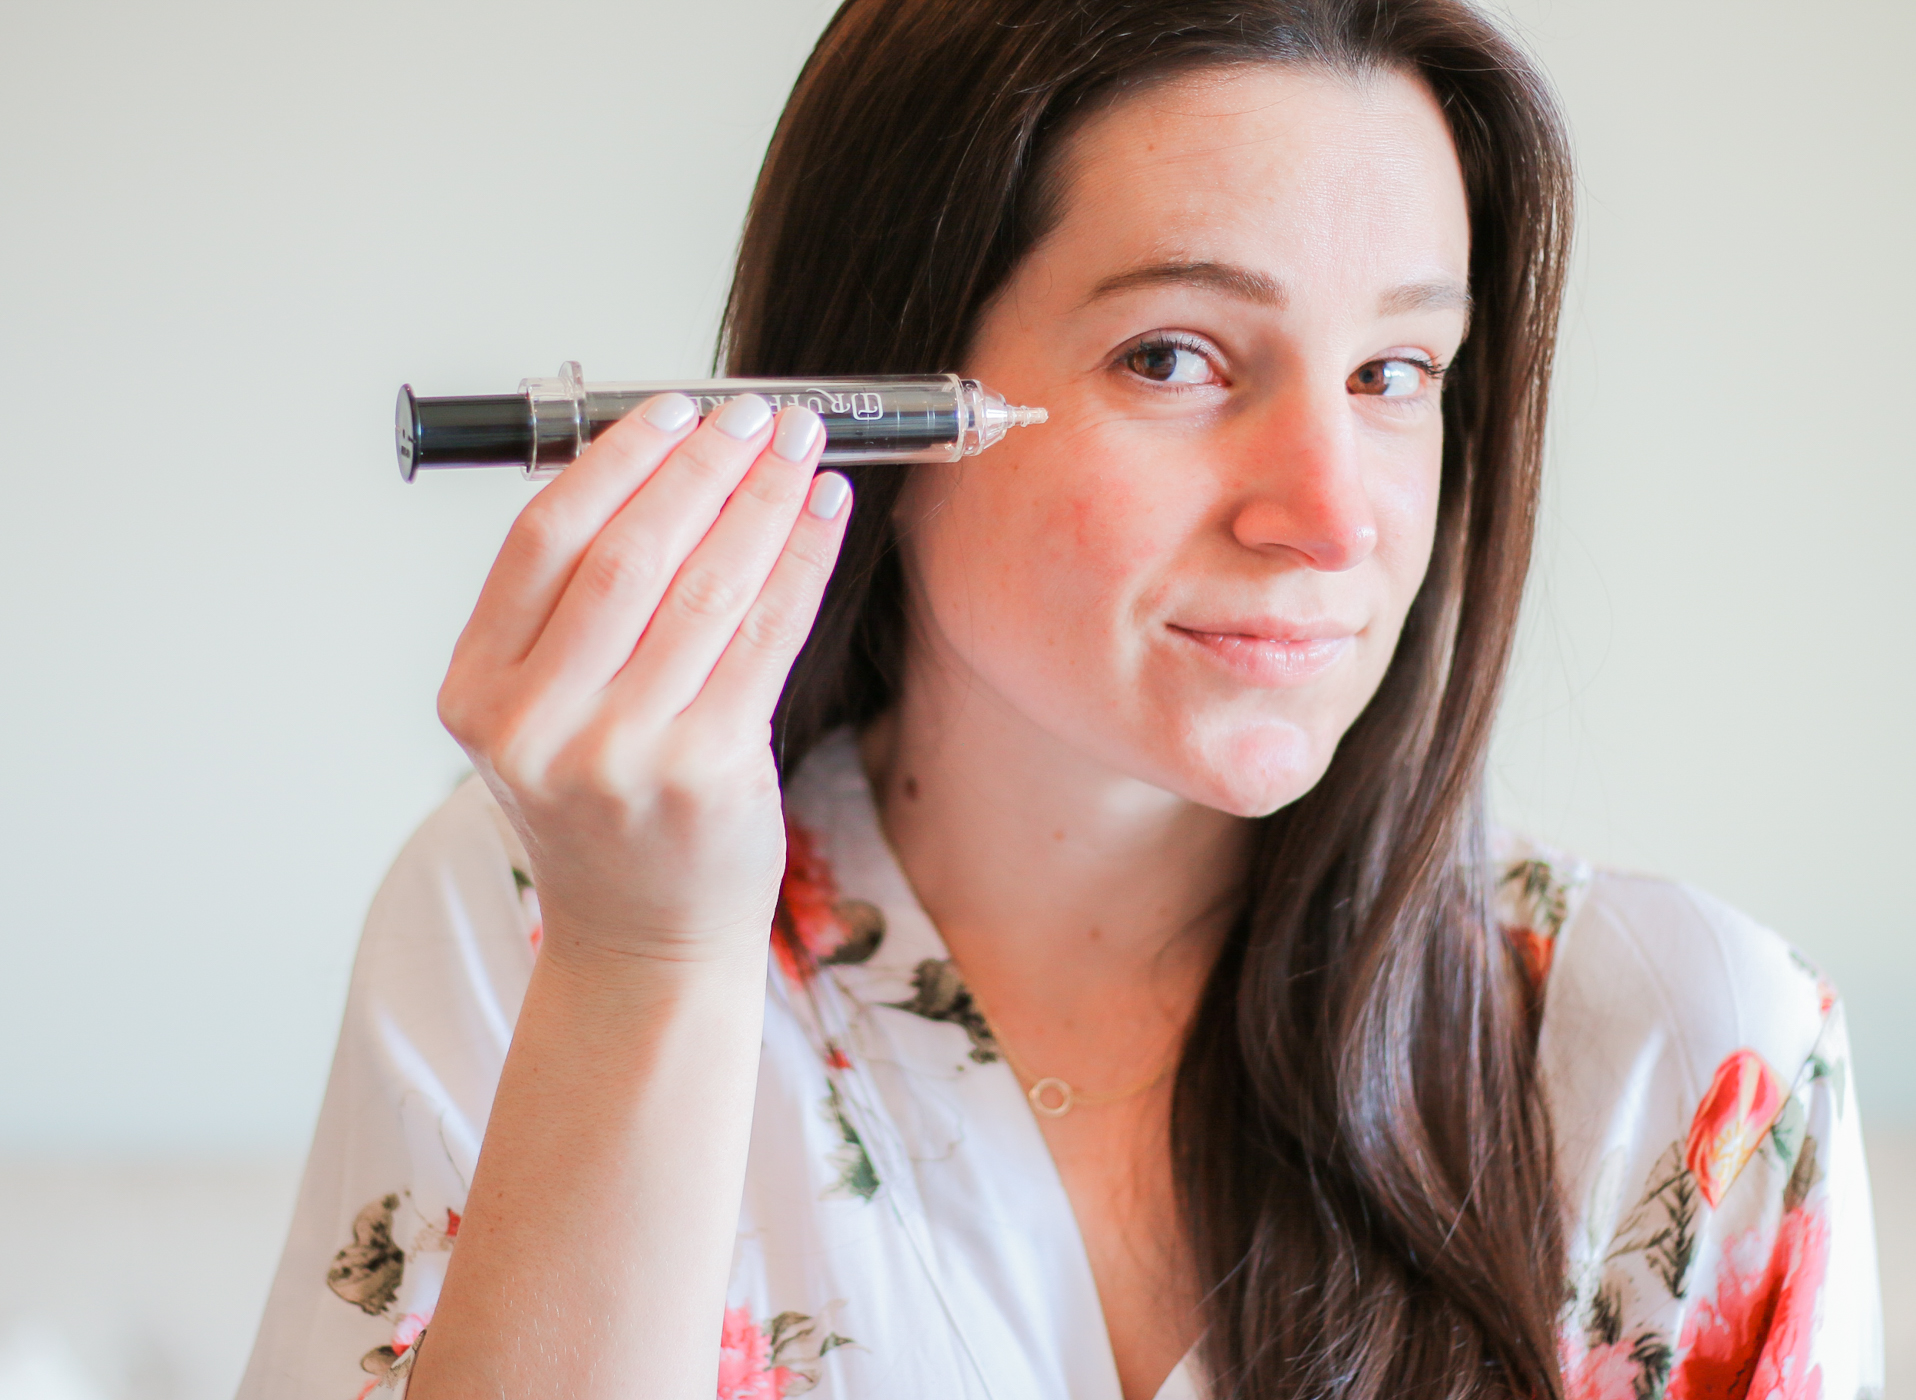 Truffoire Black Truffle Instant Repair Syringe review, Truffoire skin care review, black truffle skincare, truffle skincare, Truffoire Review: The Benefits of Black Truffle Skincare by beauty blogger Stephanie Ziajka from Diary of a Debutante, Truffoire Black Collection review, Truffoire review